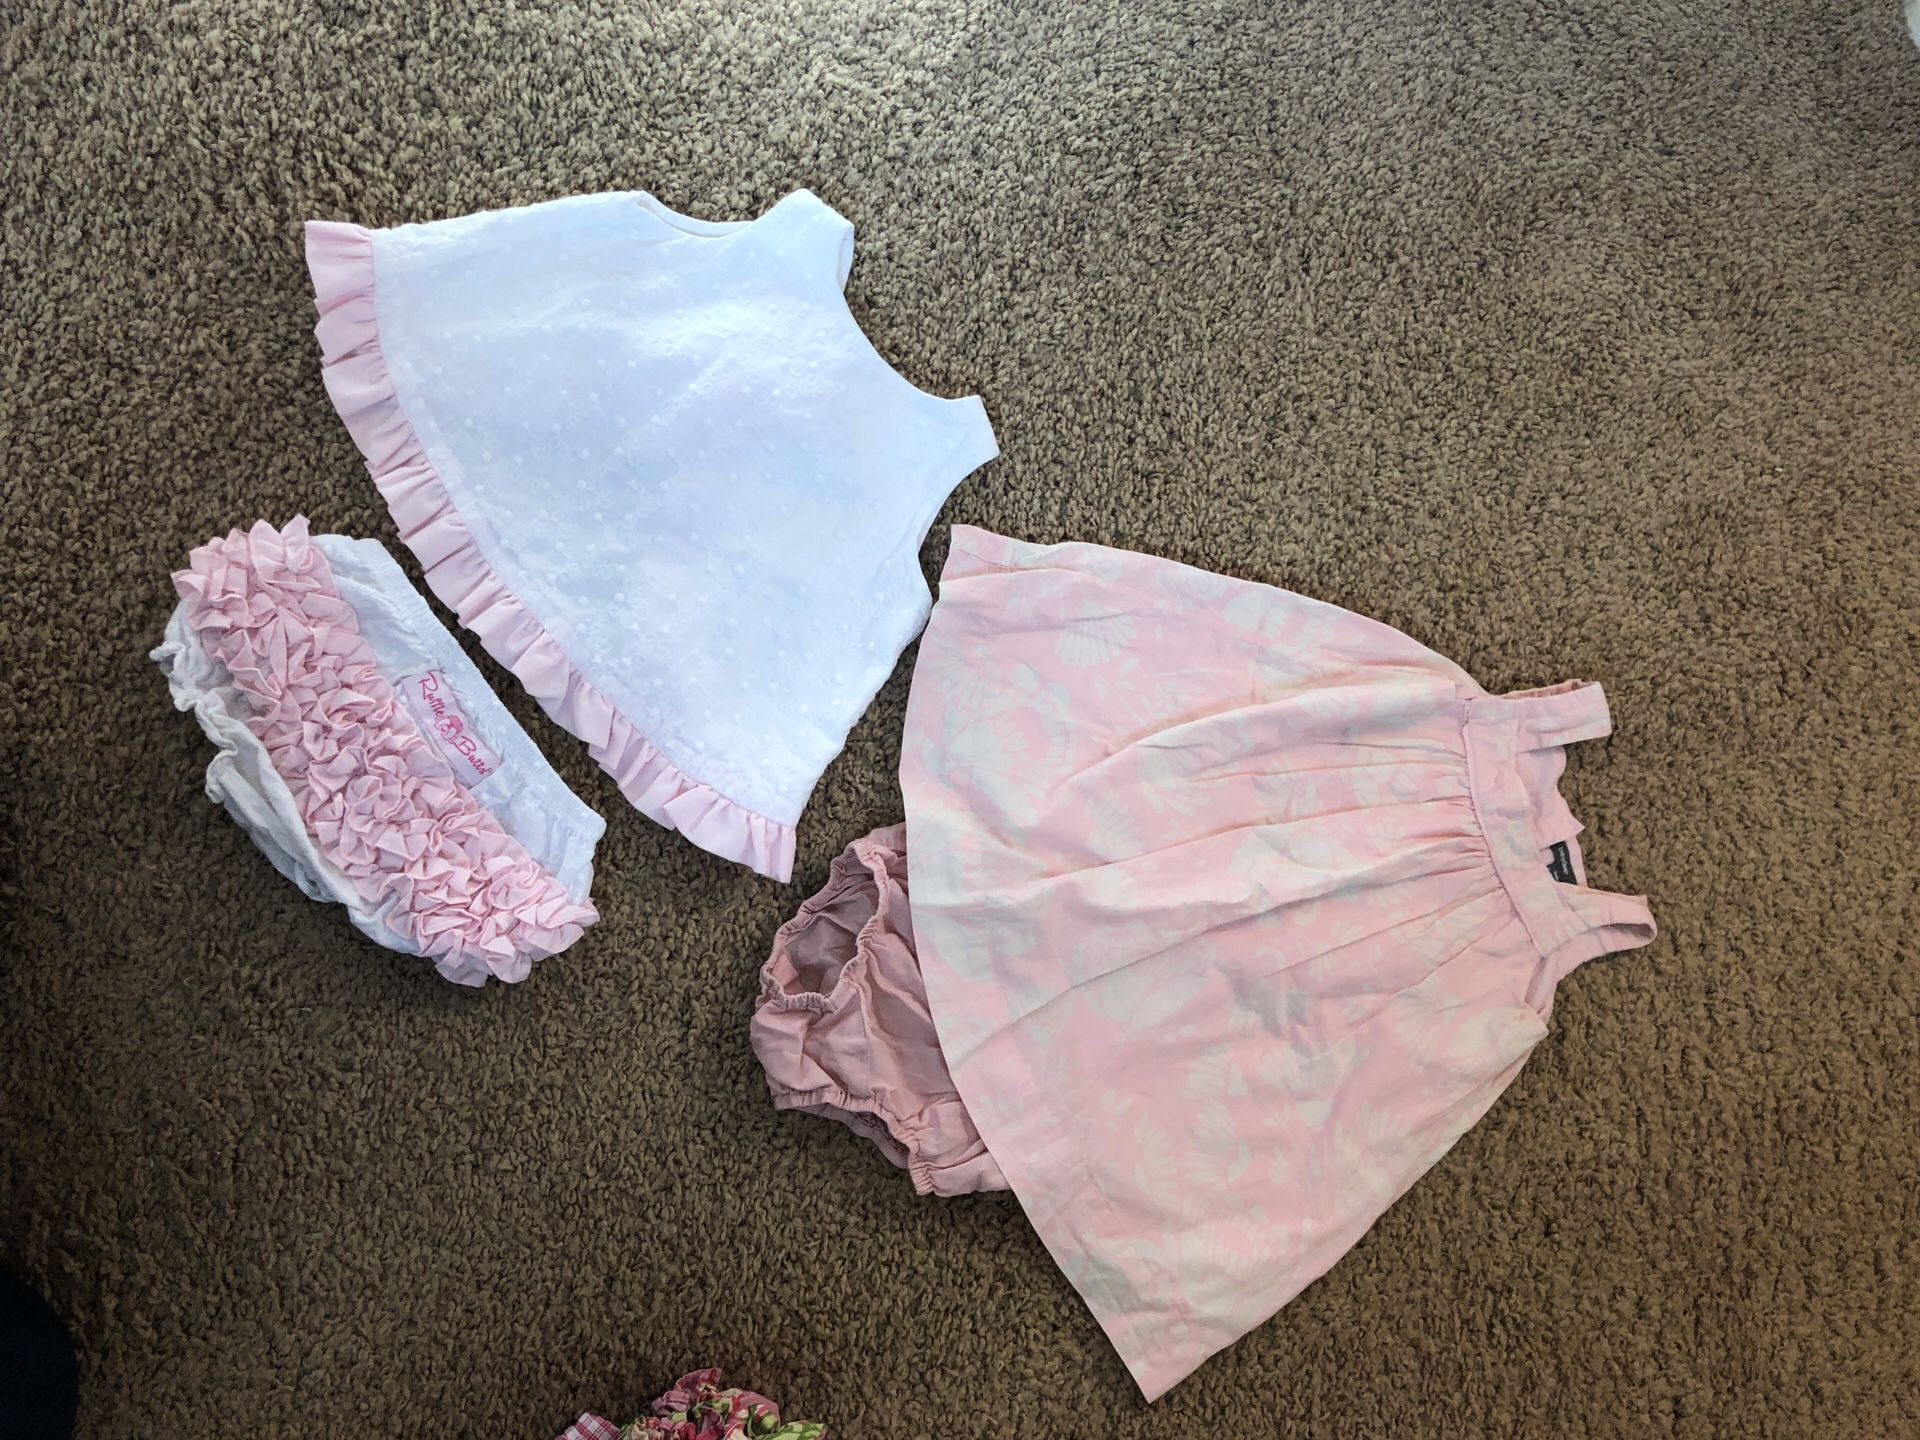 Baby Gap and Ruffle Butts dresses 12-18 months